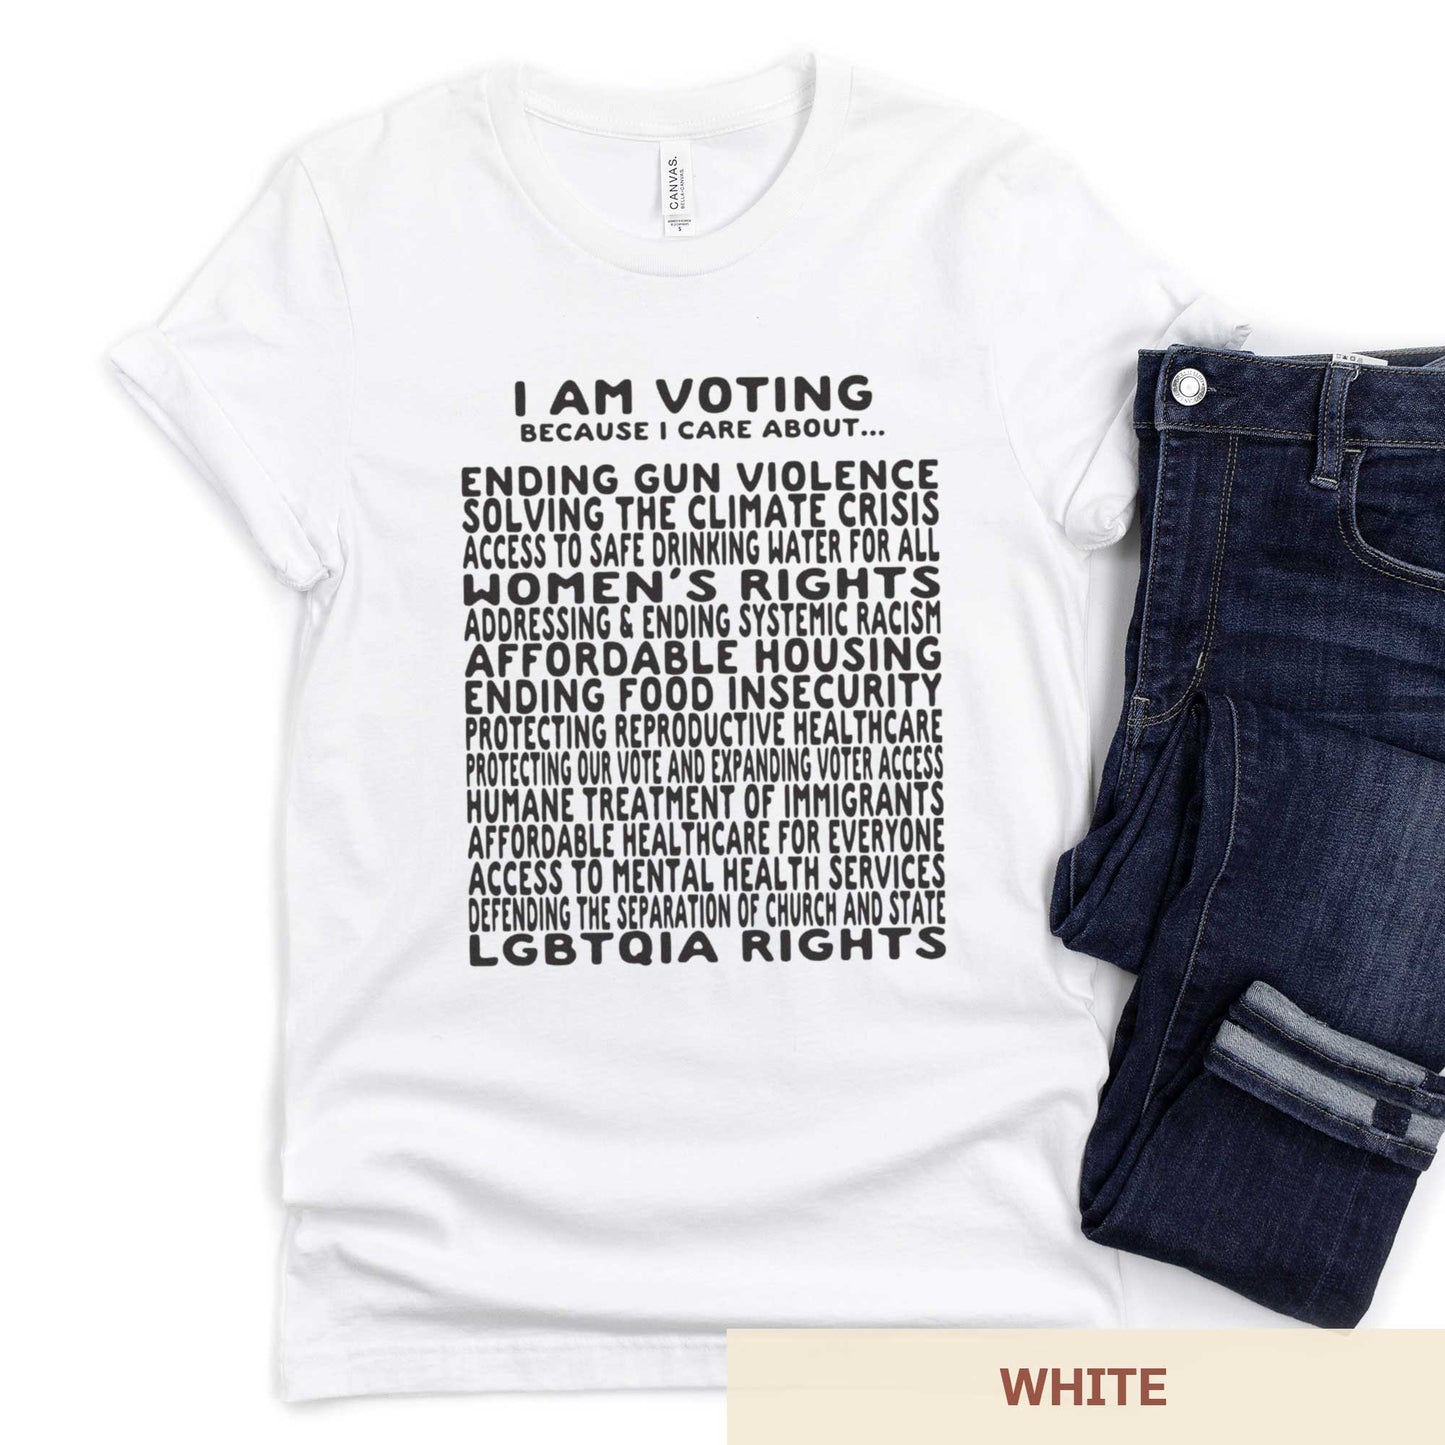 A white Bella Canvas t-shirt featuring a long list of issues to vote on.